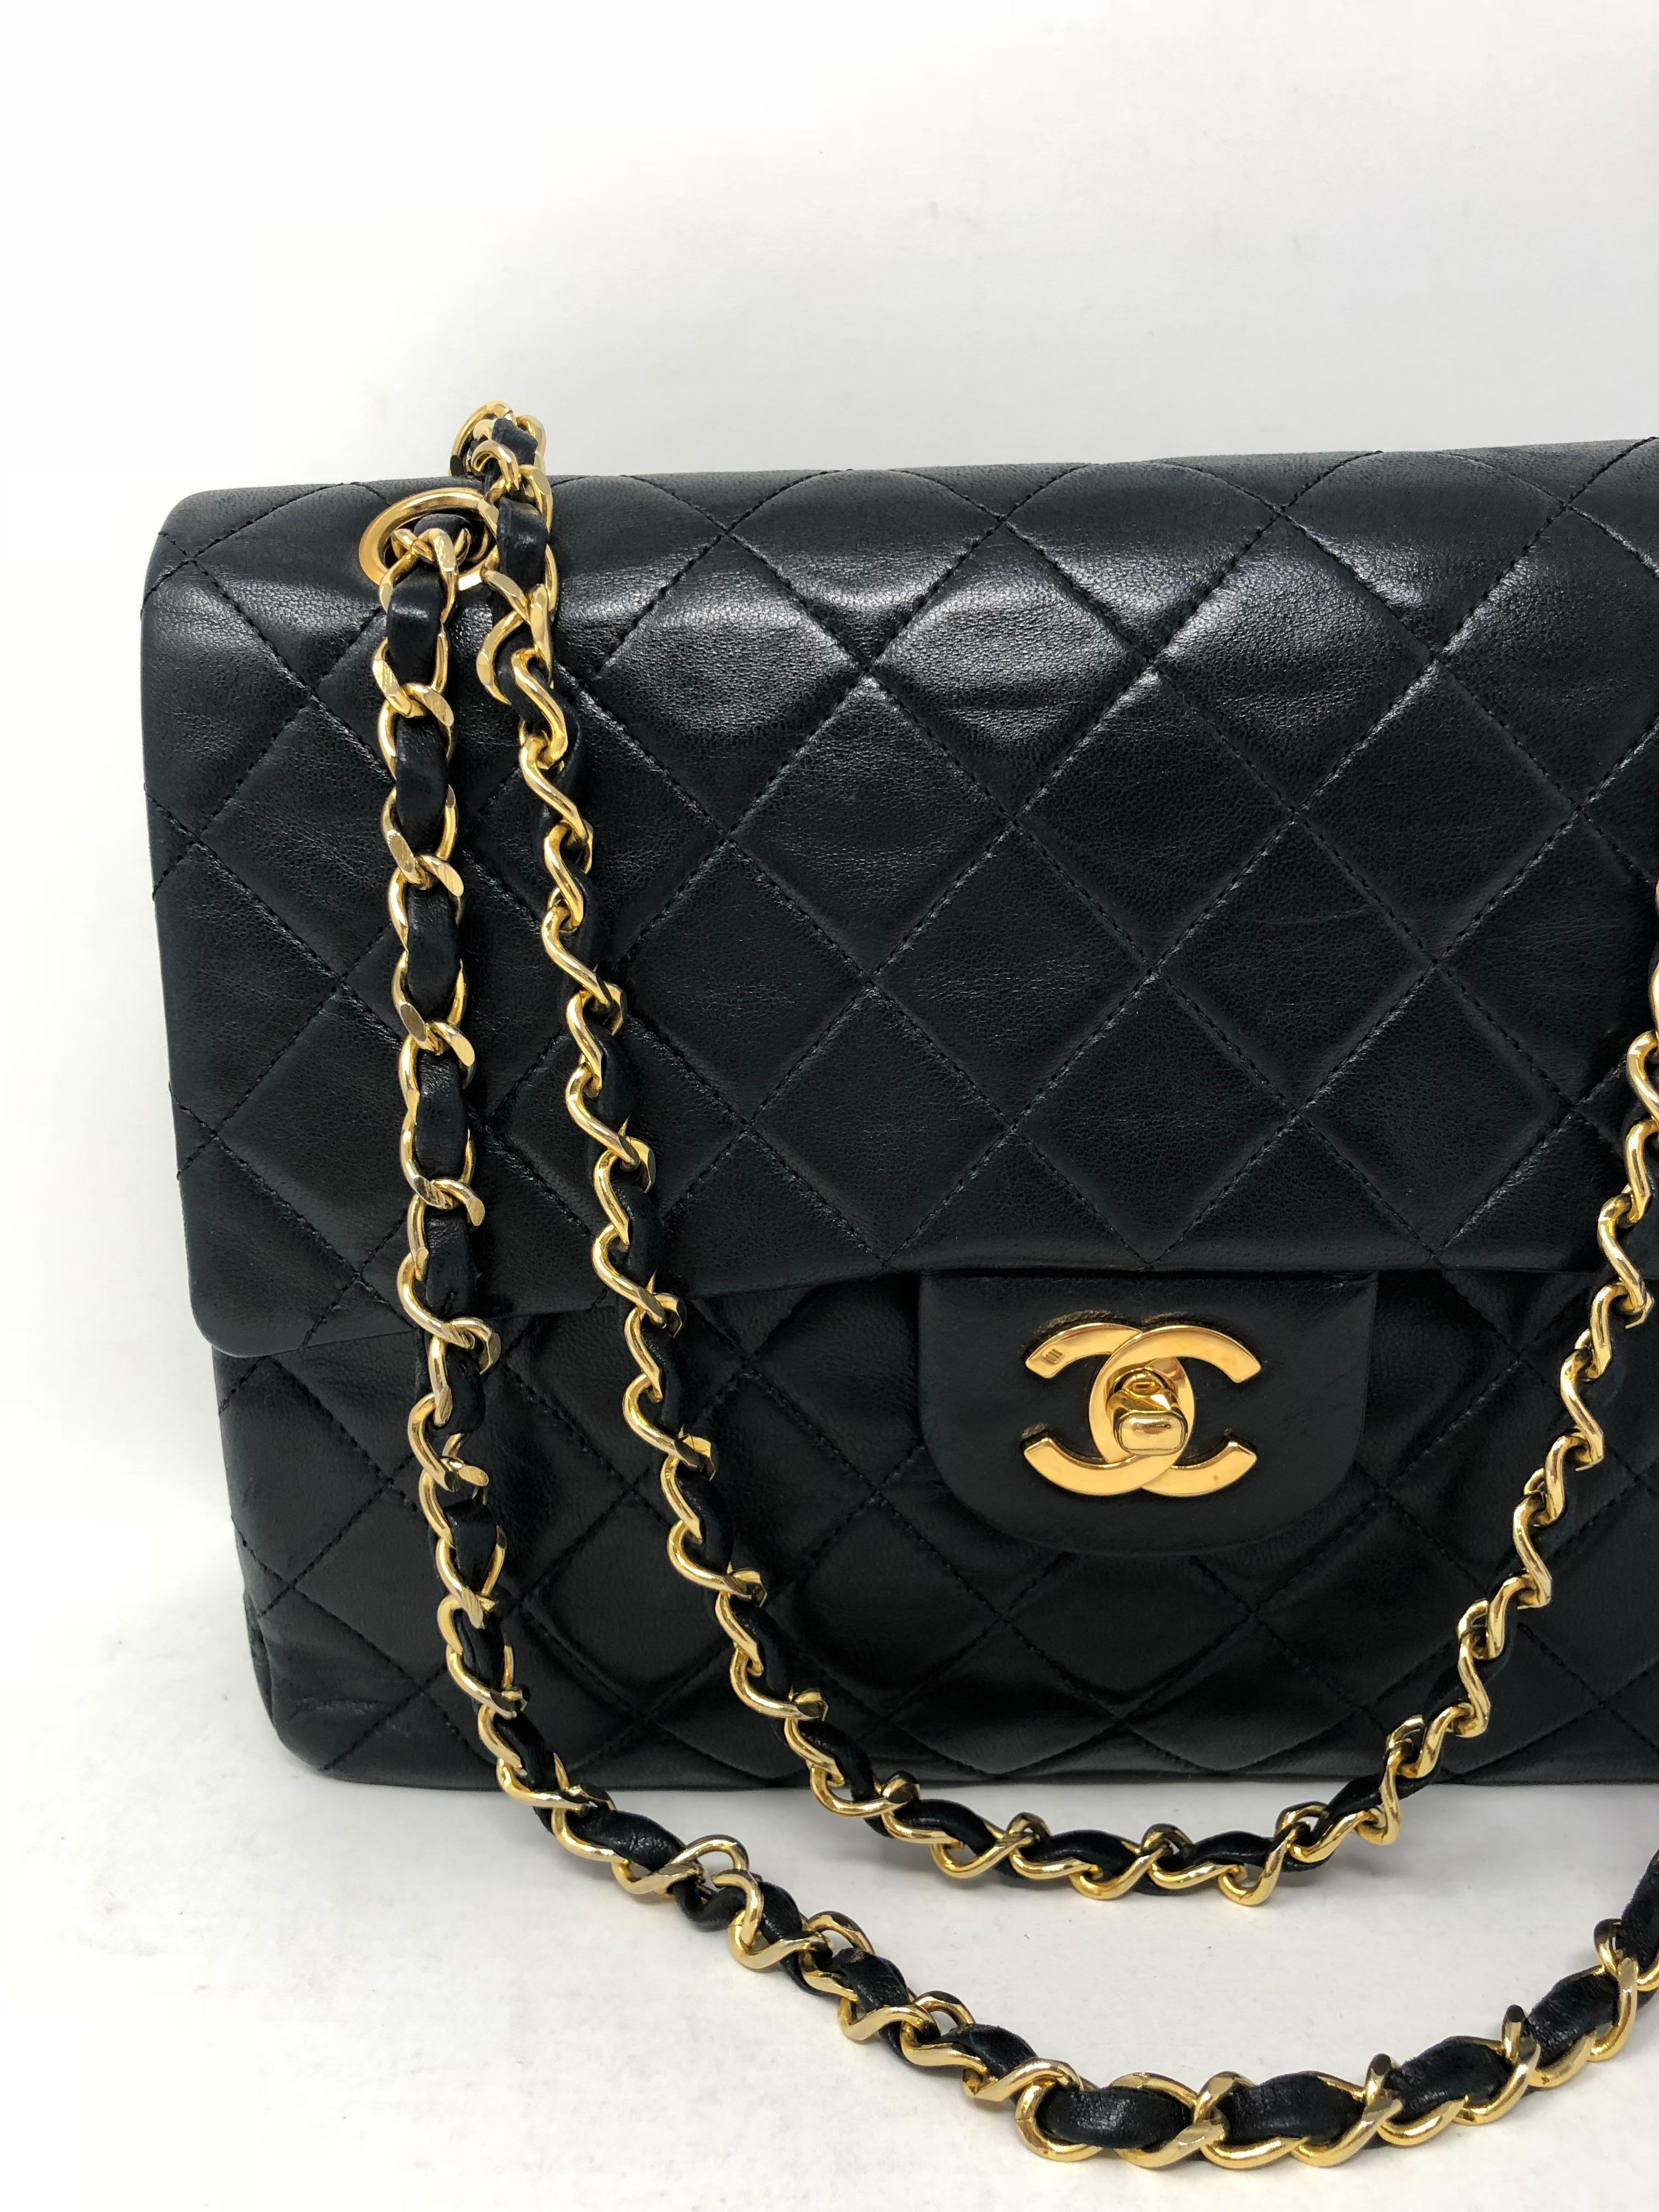 Chanel vintage square classic double flap bag in quilted lambskin leather. Beautiful black color with woven-in leather gold chain strap. Can be worn with straps doubled or worn with longer strap. Timeless and classic style from Chanel. Medium size